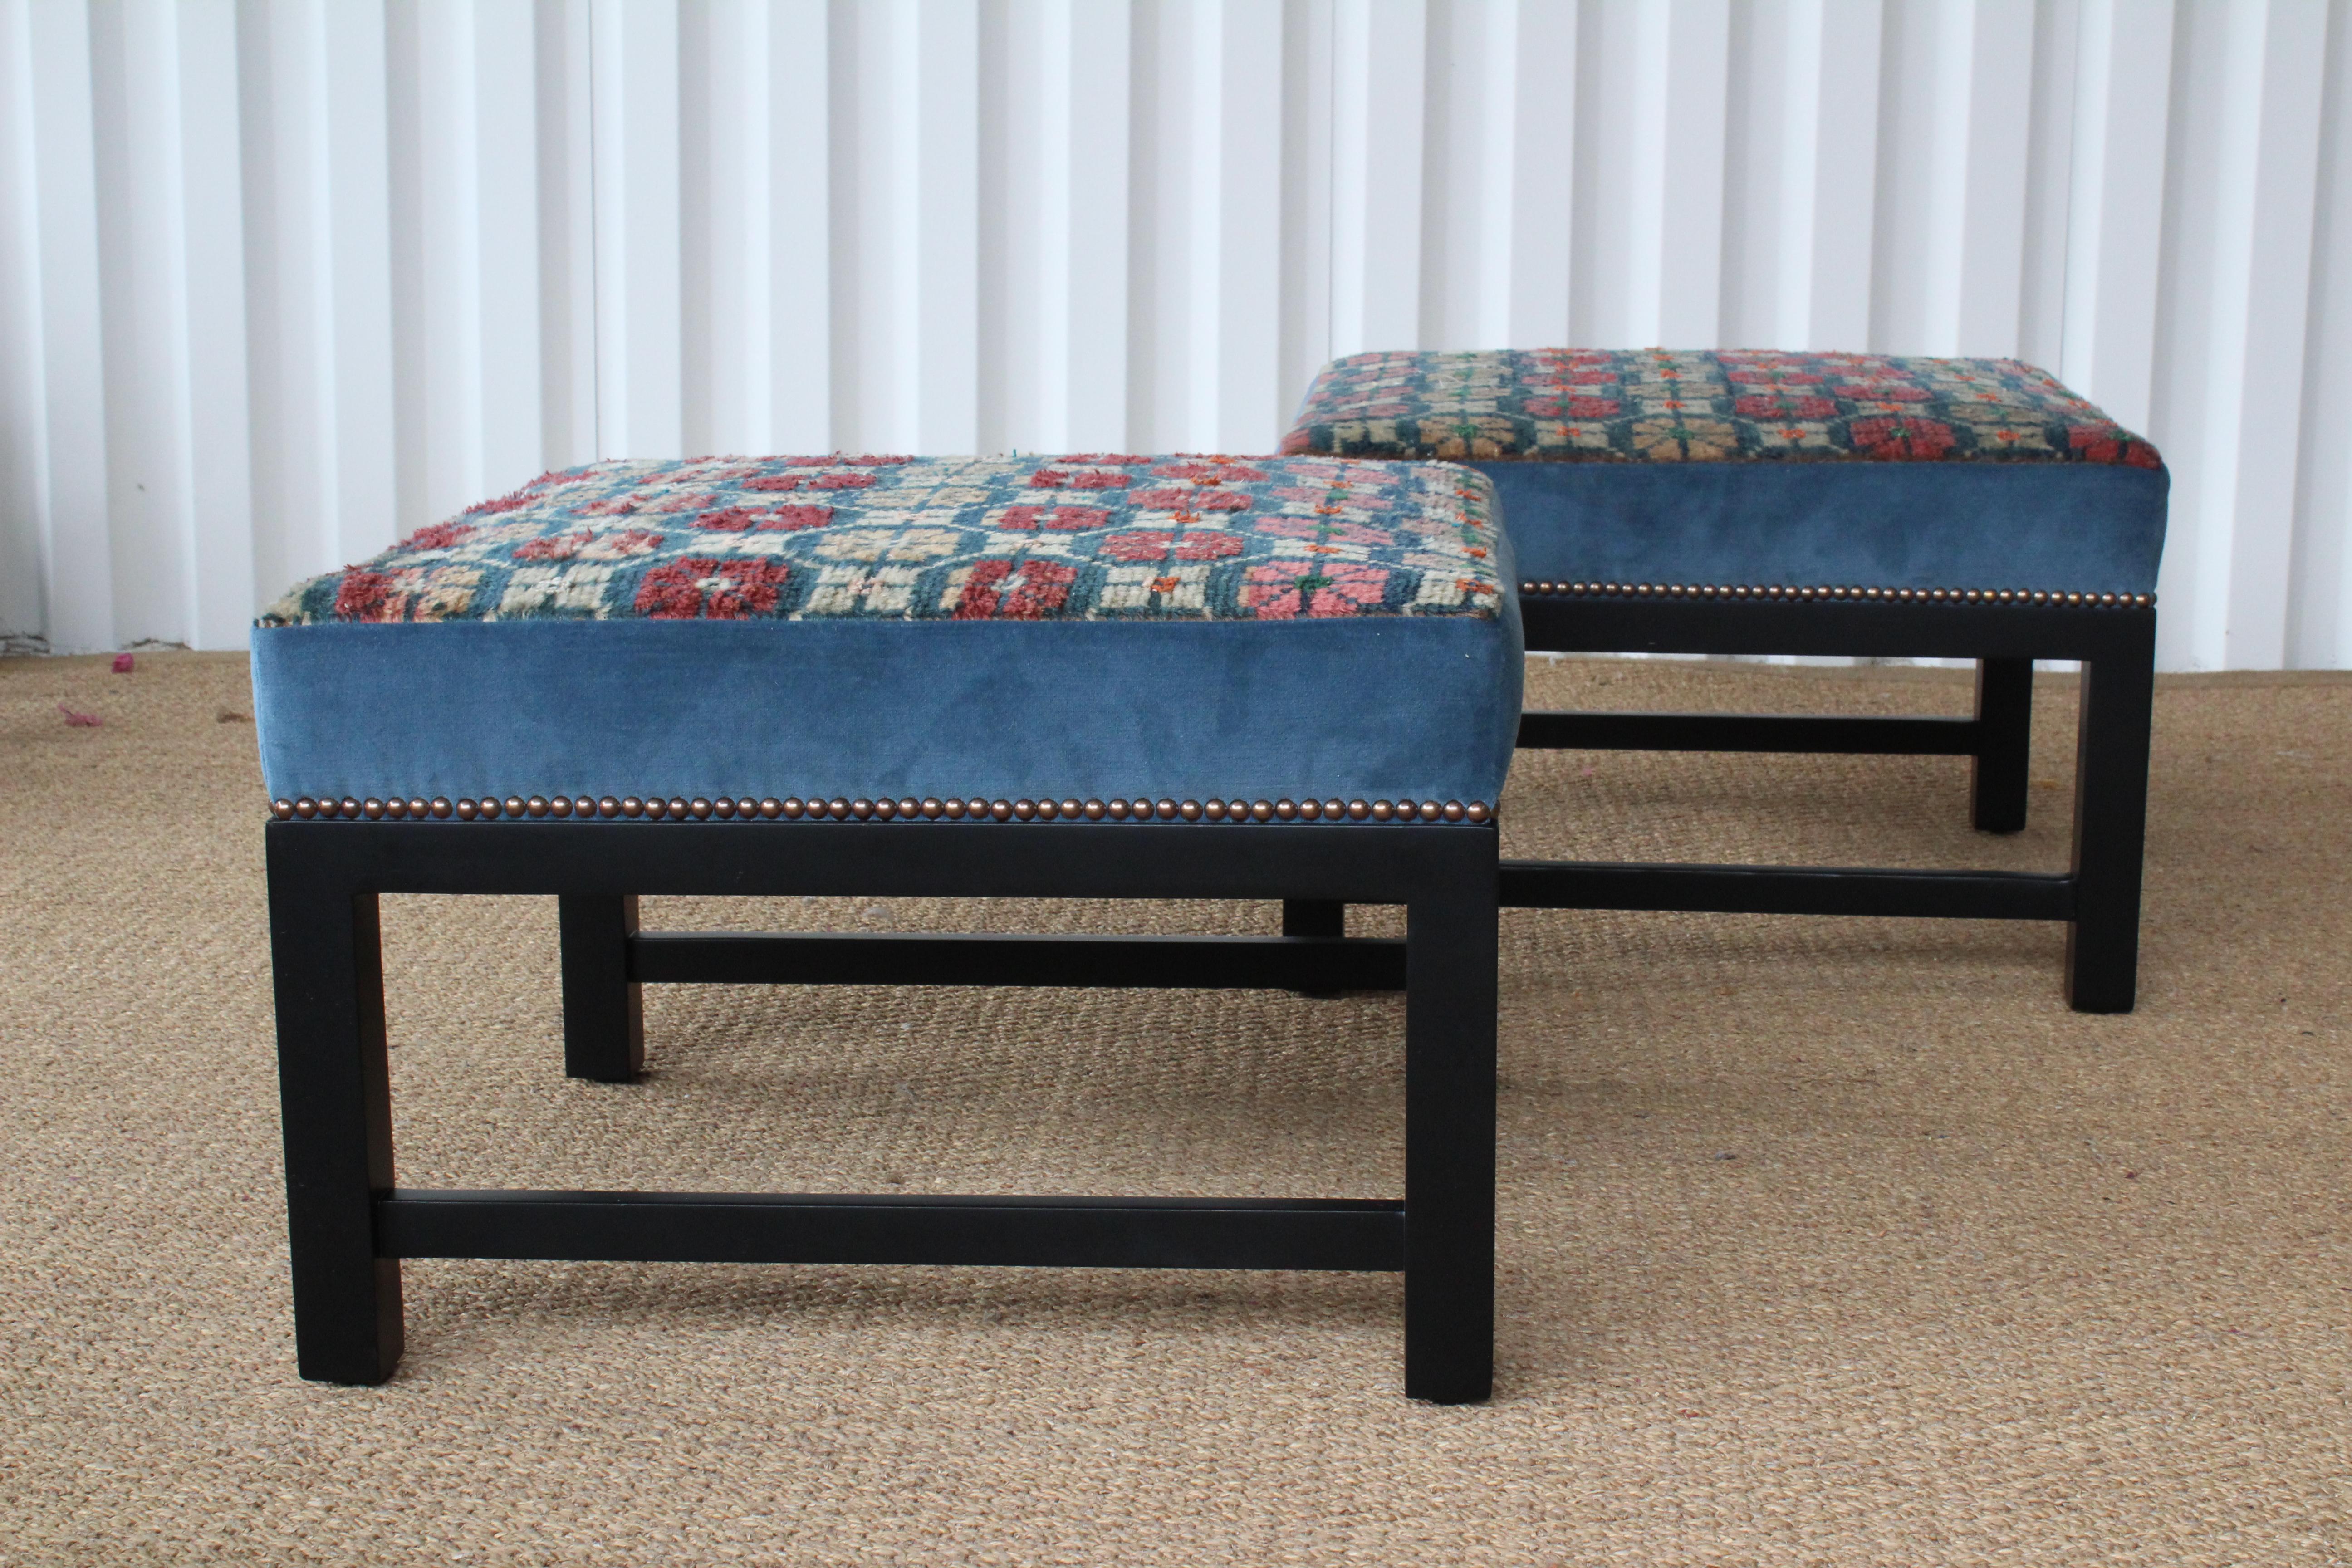 Pair of custom made stools. Upholstered with a vintage wool Tibetan rug and blue velvet. Bases are ebonized walnut. Antique brass nailhead details. Sold as a pair.